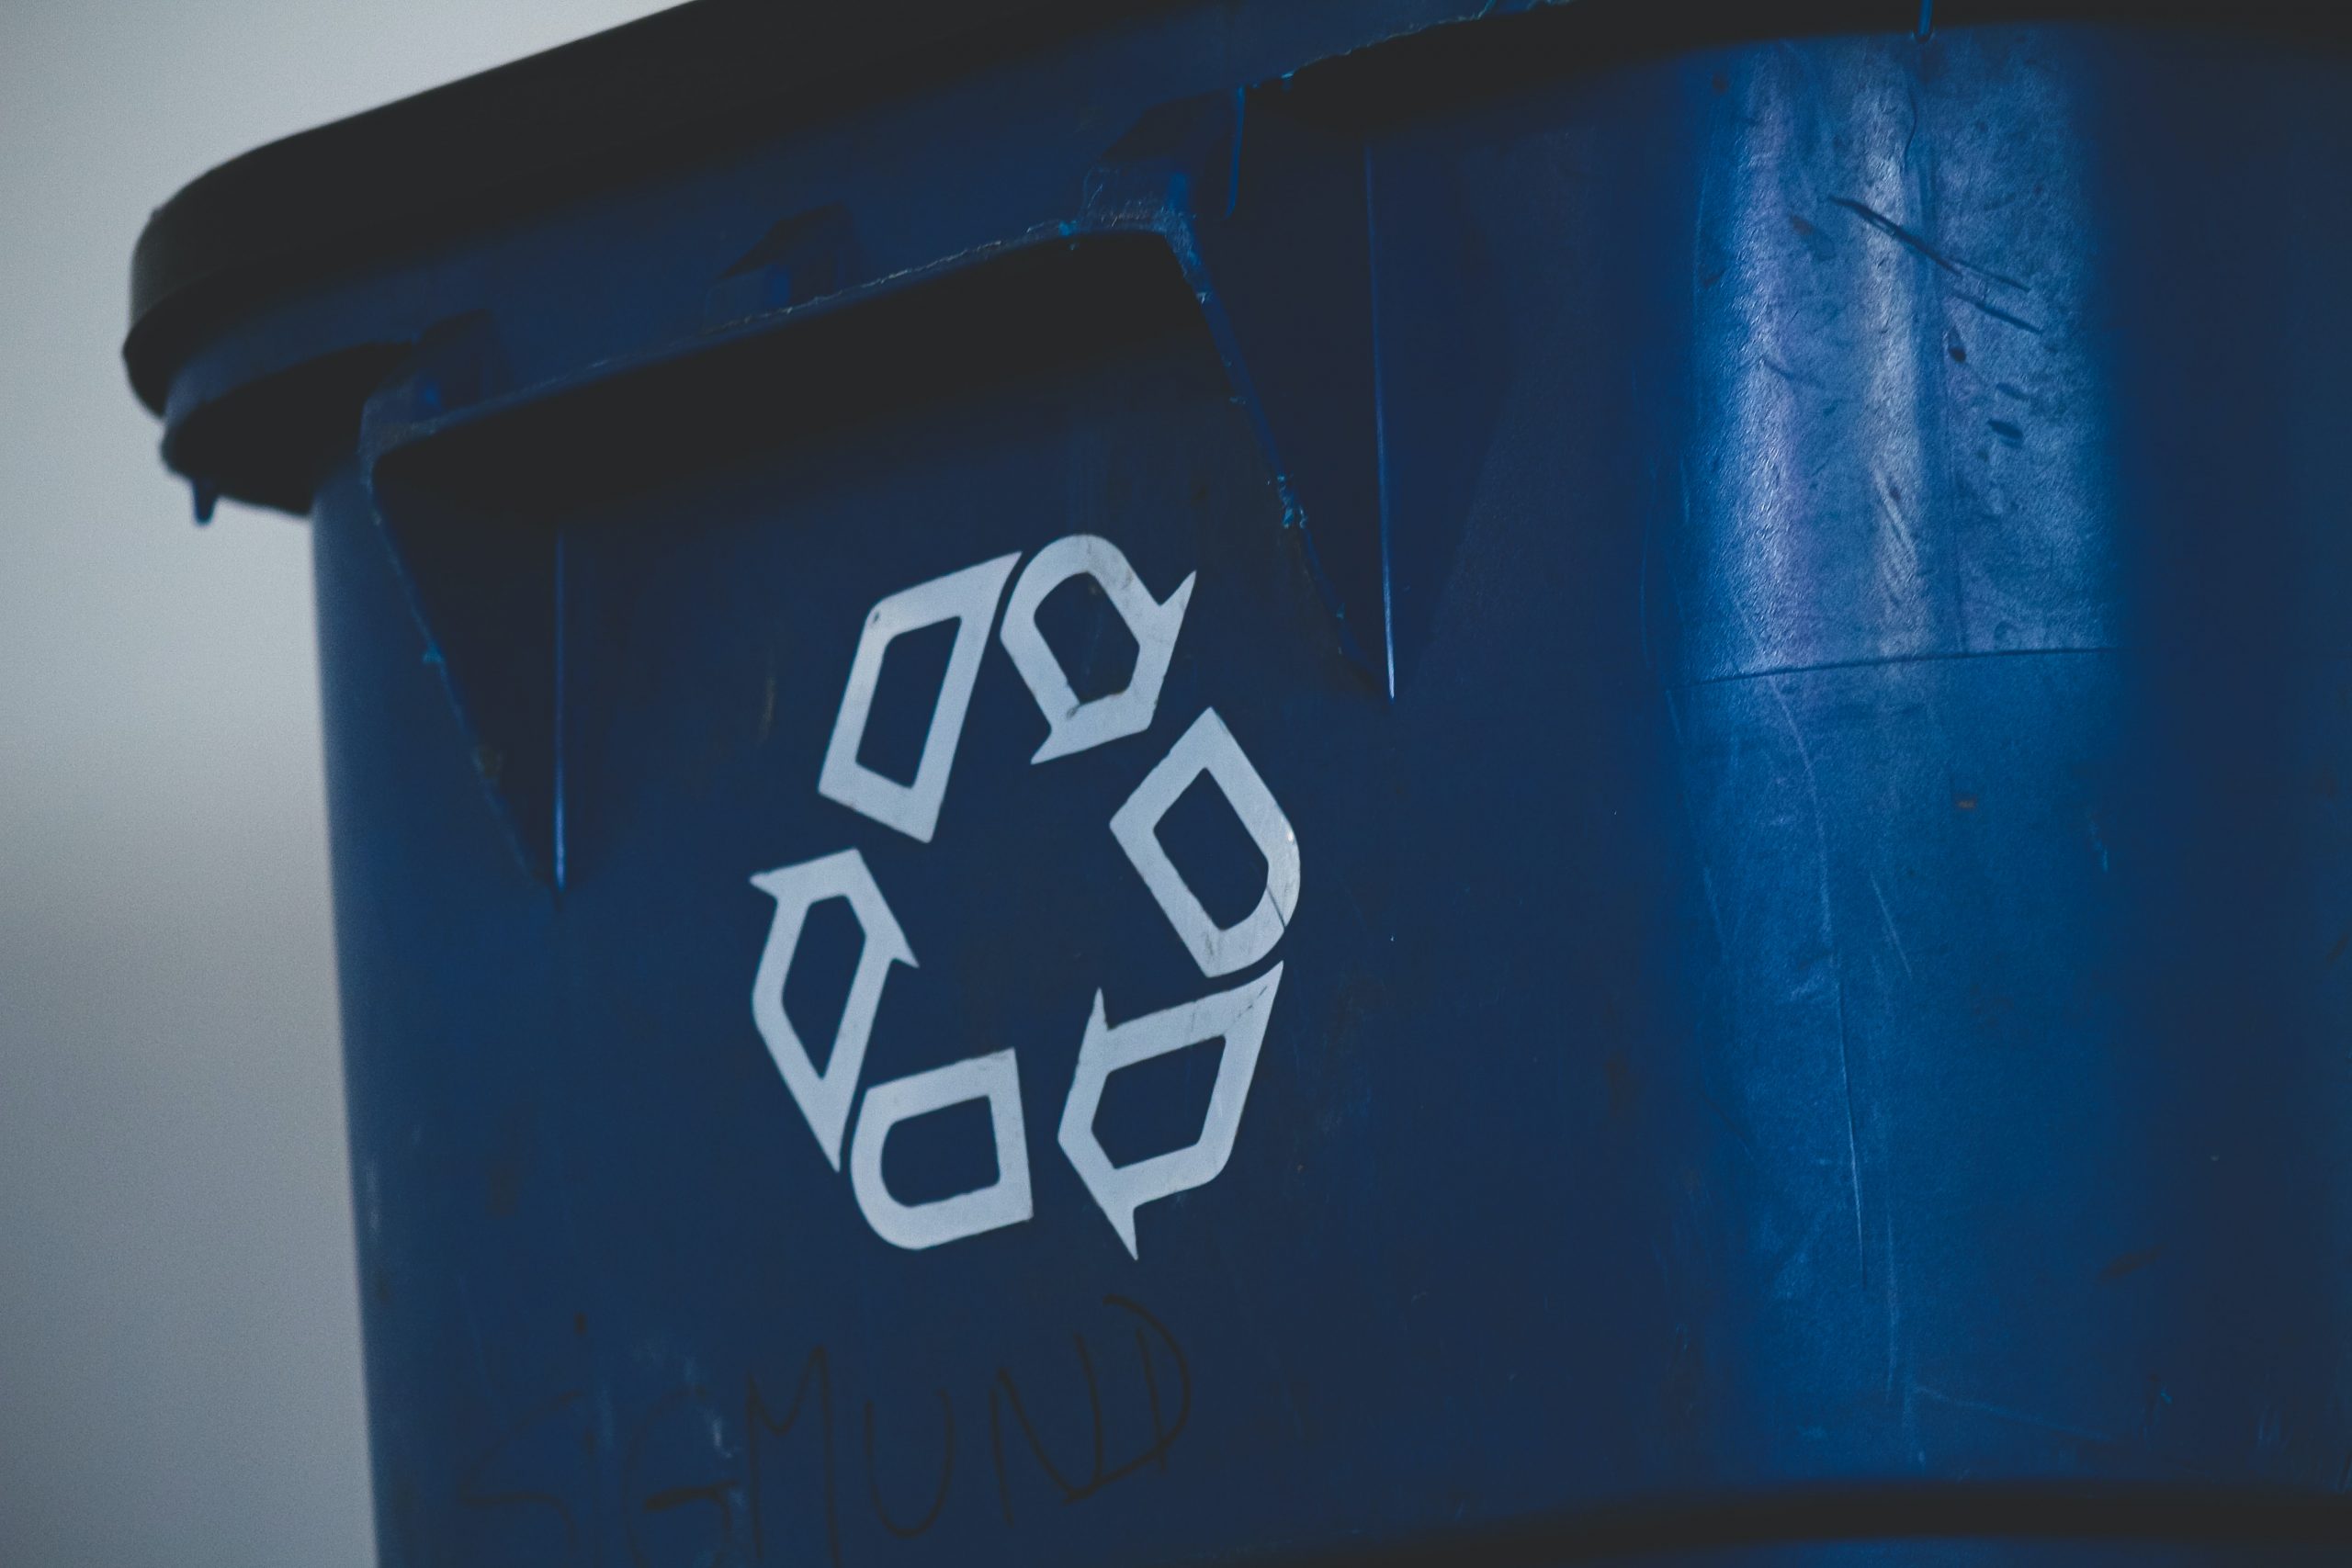 Close up of a blue bin with a recycling symbol painted on in white.